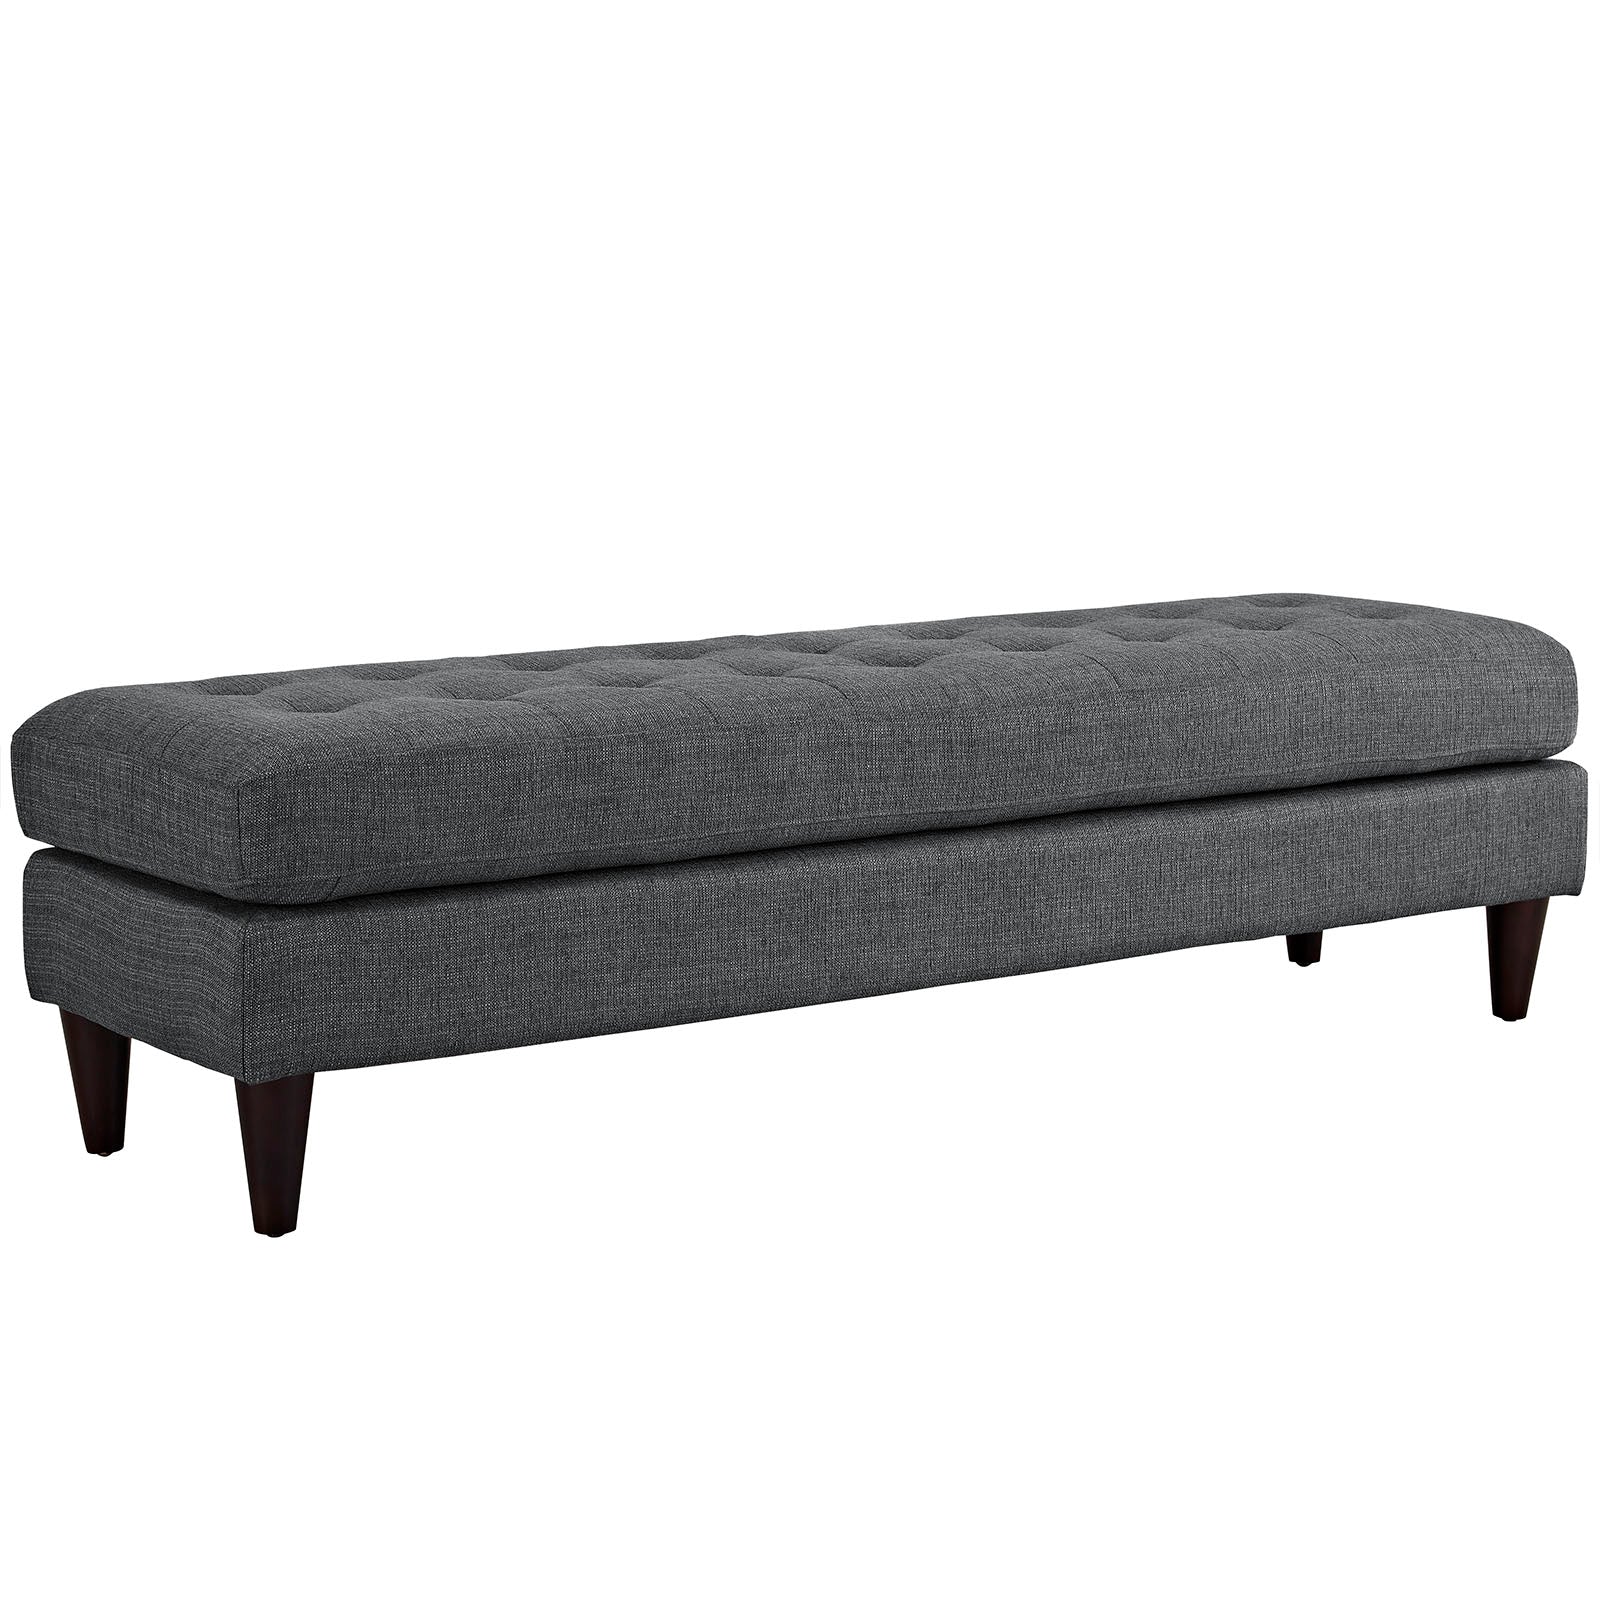 Modway Benches - Empress Large Bench Gray